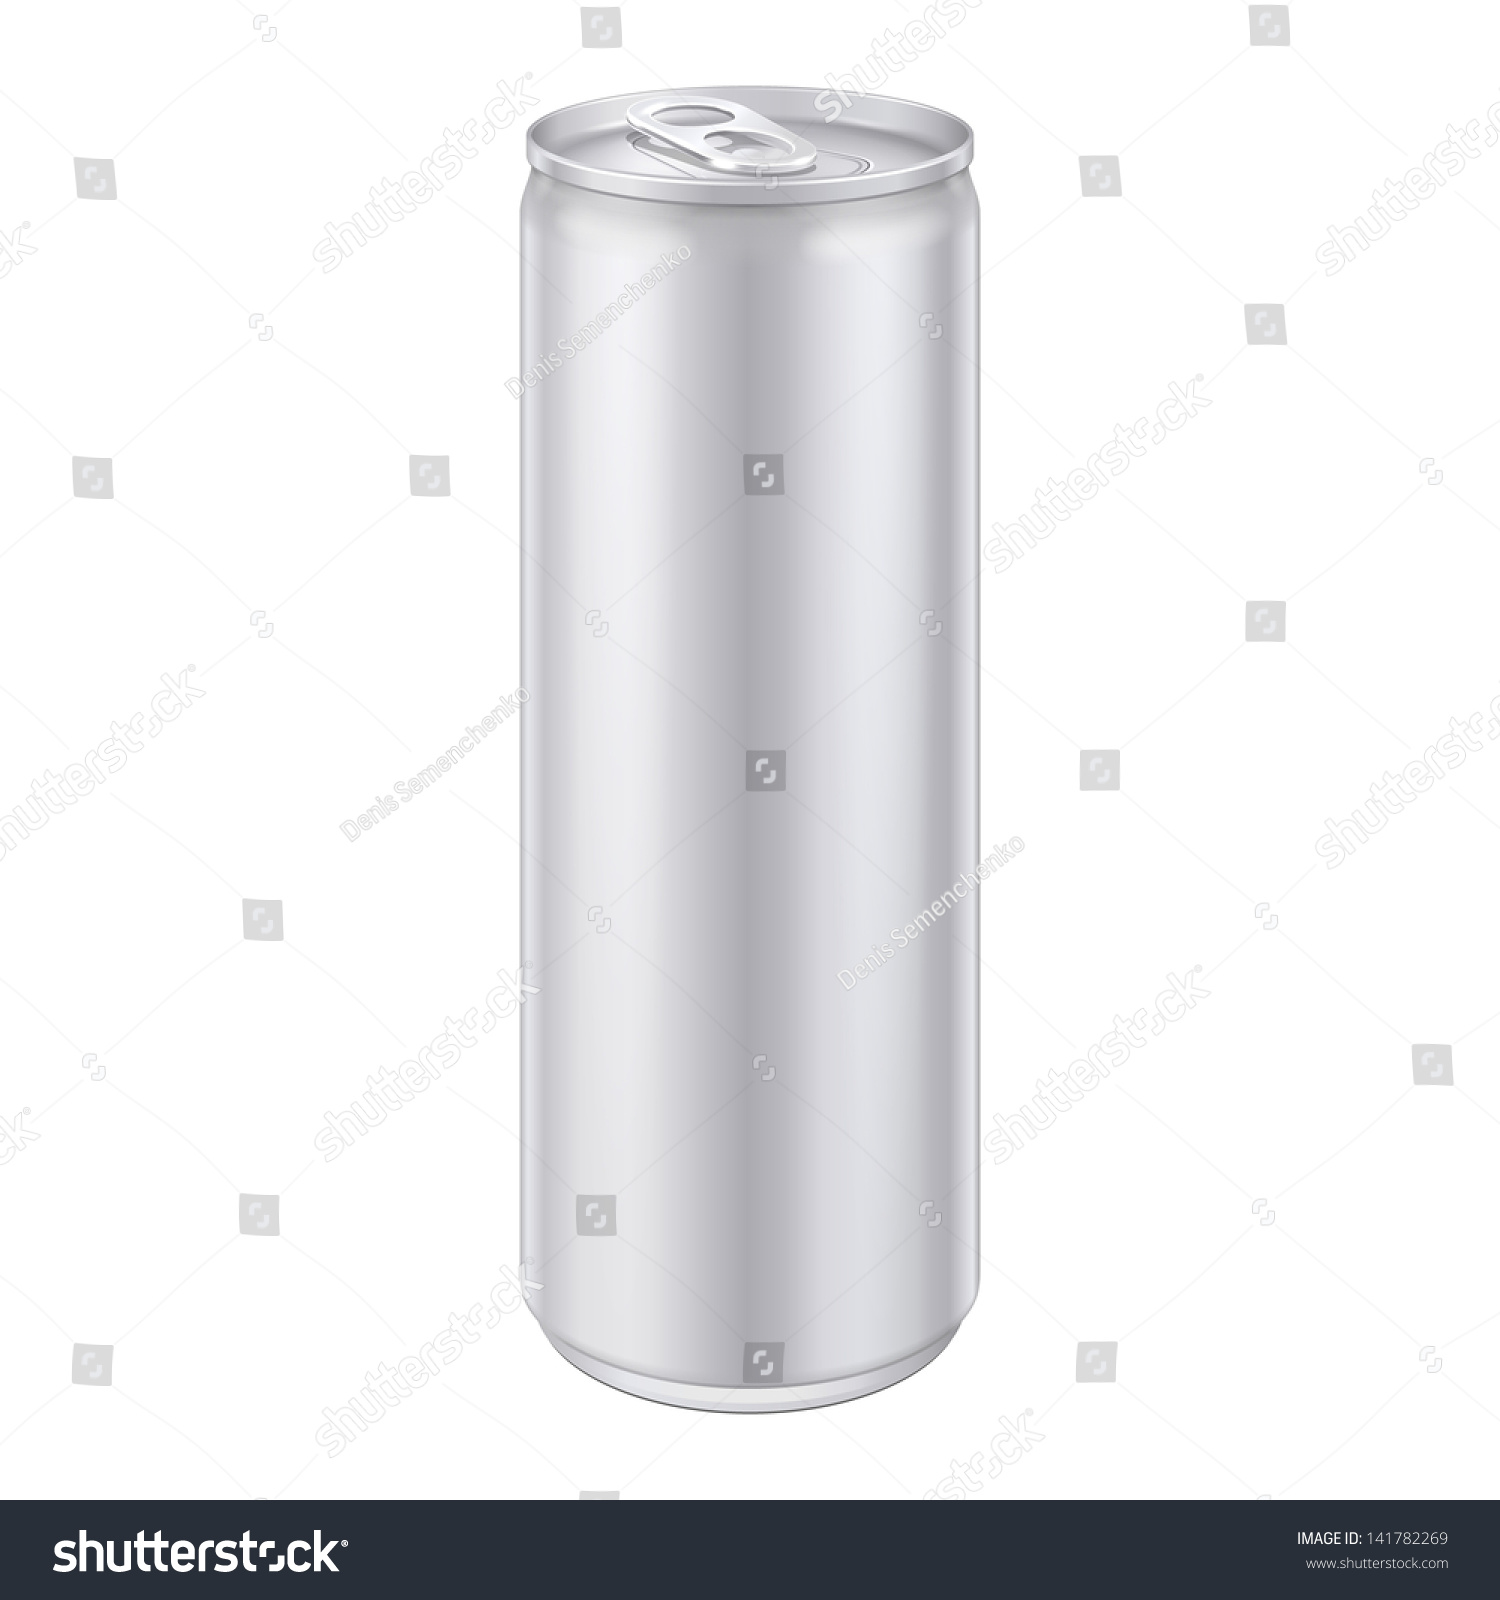 SVG of Metal Aluminum Beverage Drink Can 250ml. Mockup Template Ready For Your Design. Isolated On White Background. Product Packing. Vector EPS10 Product Packing Vector EPS10 svg